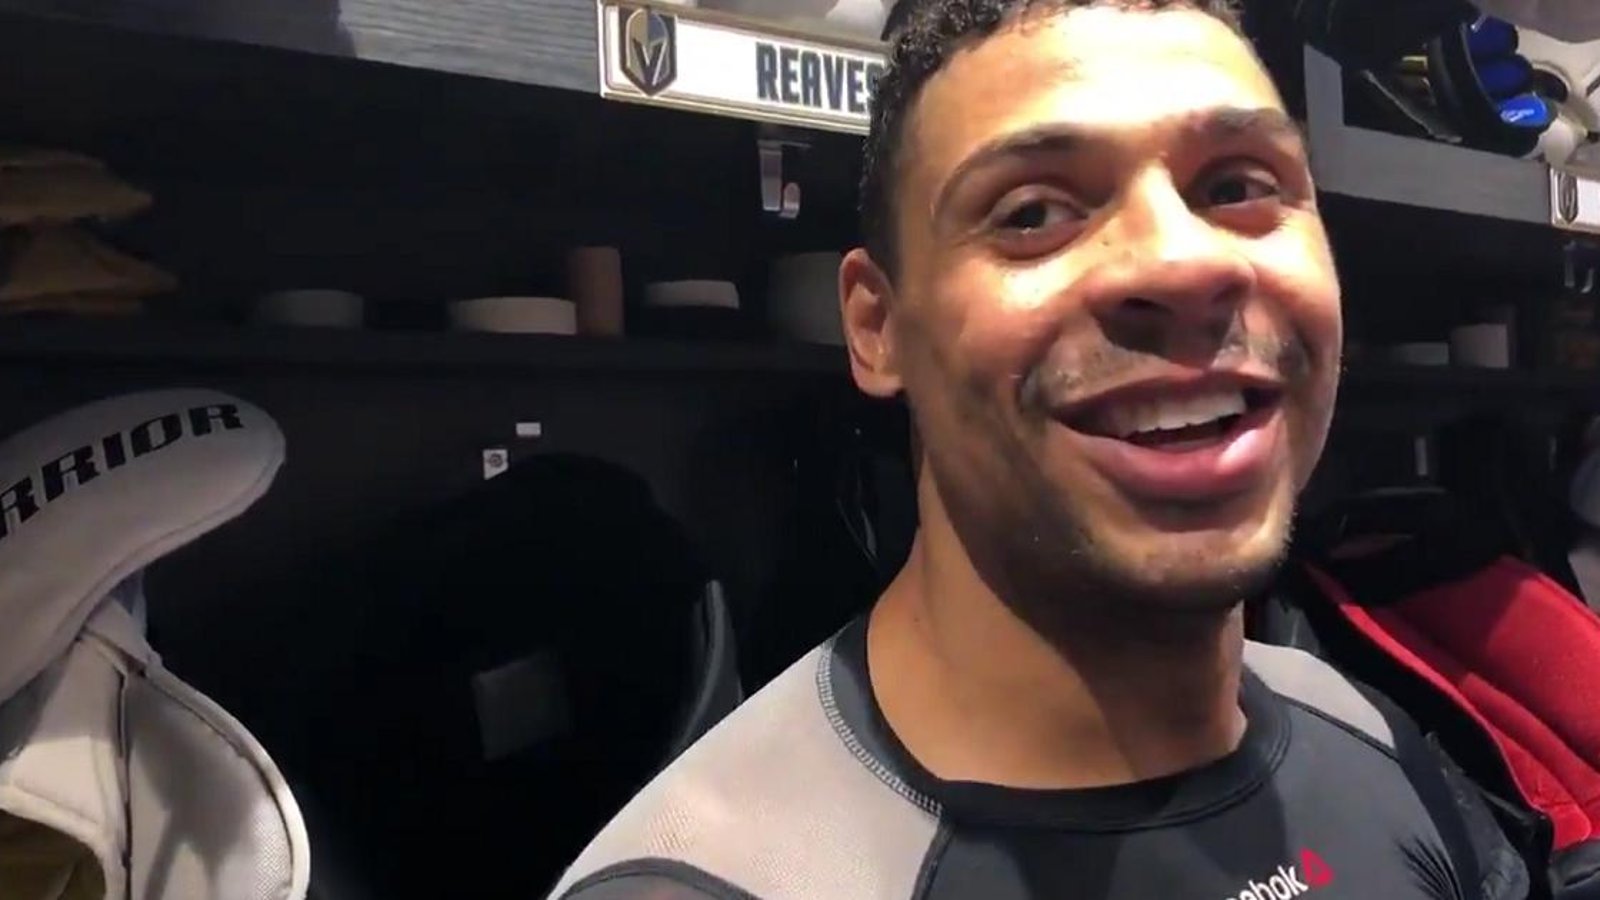 Ryan Reaves gives hilarious post game interview after another early season goal.